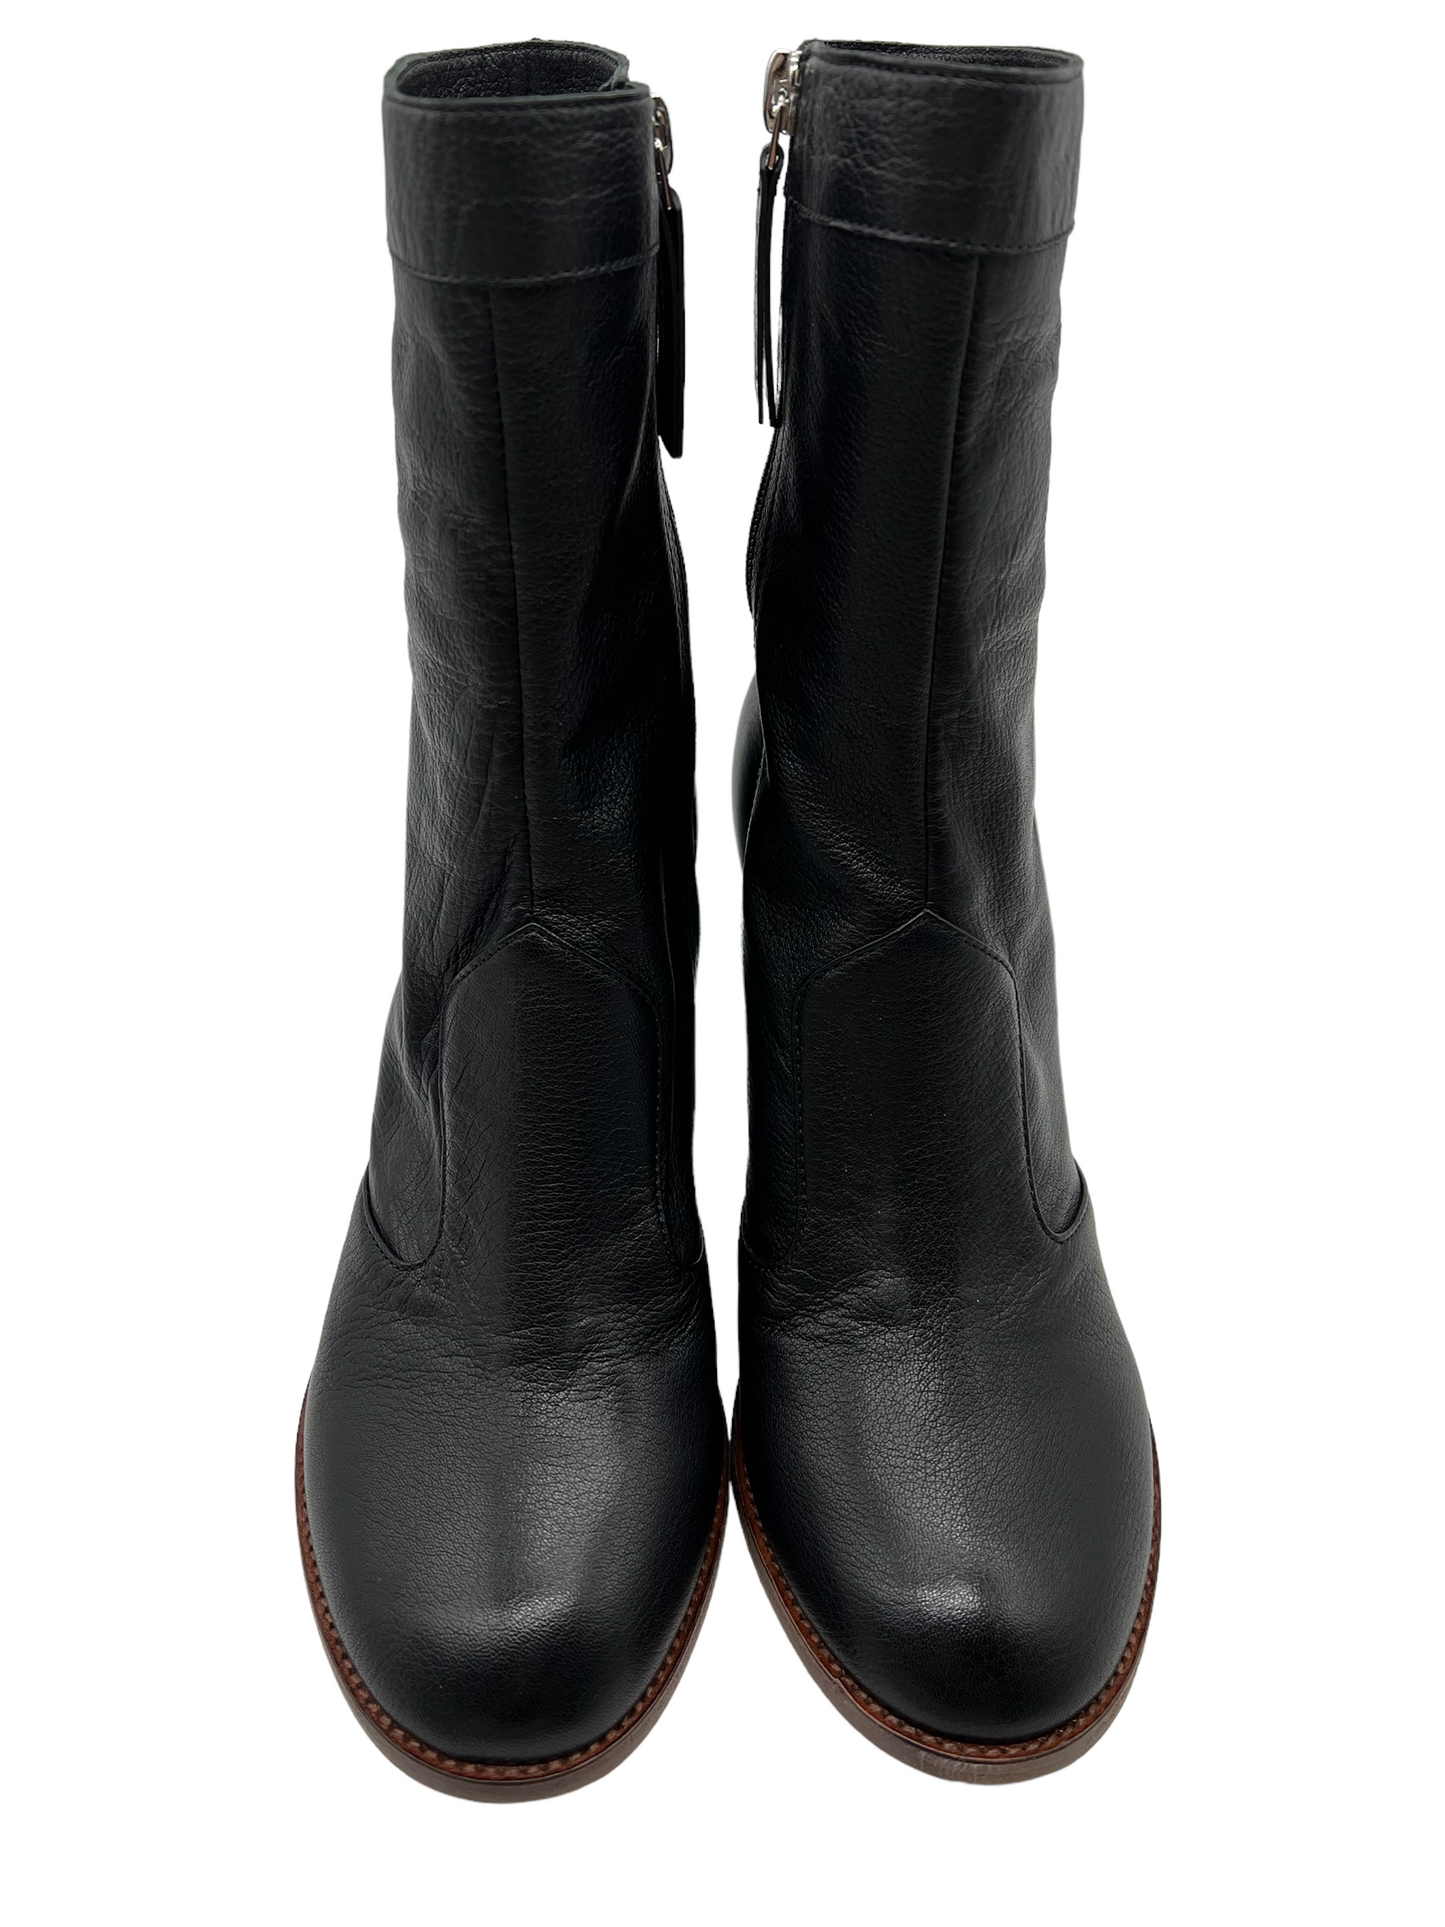 Marc Jacobs Black Leather Sofia Loves The Ankle Boots Size 40 Boots